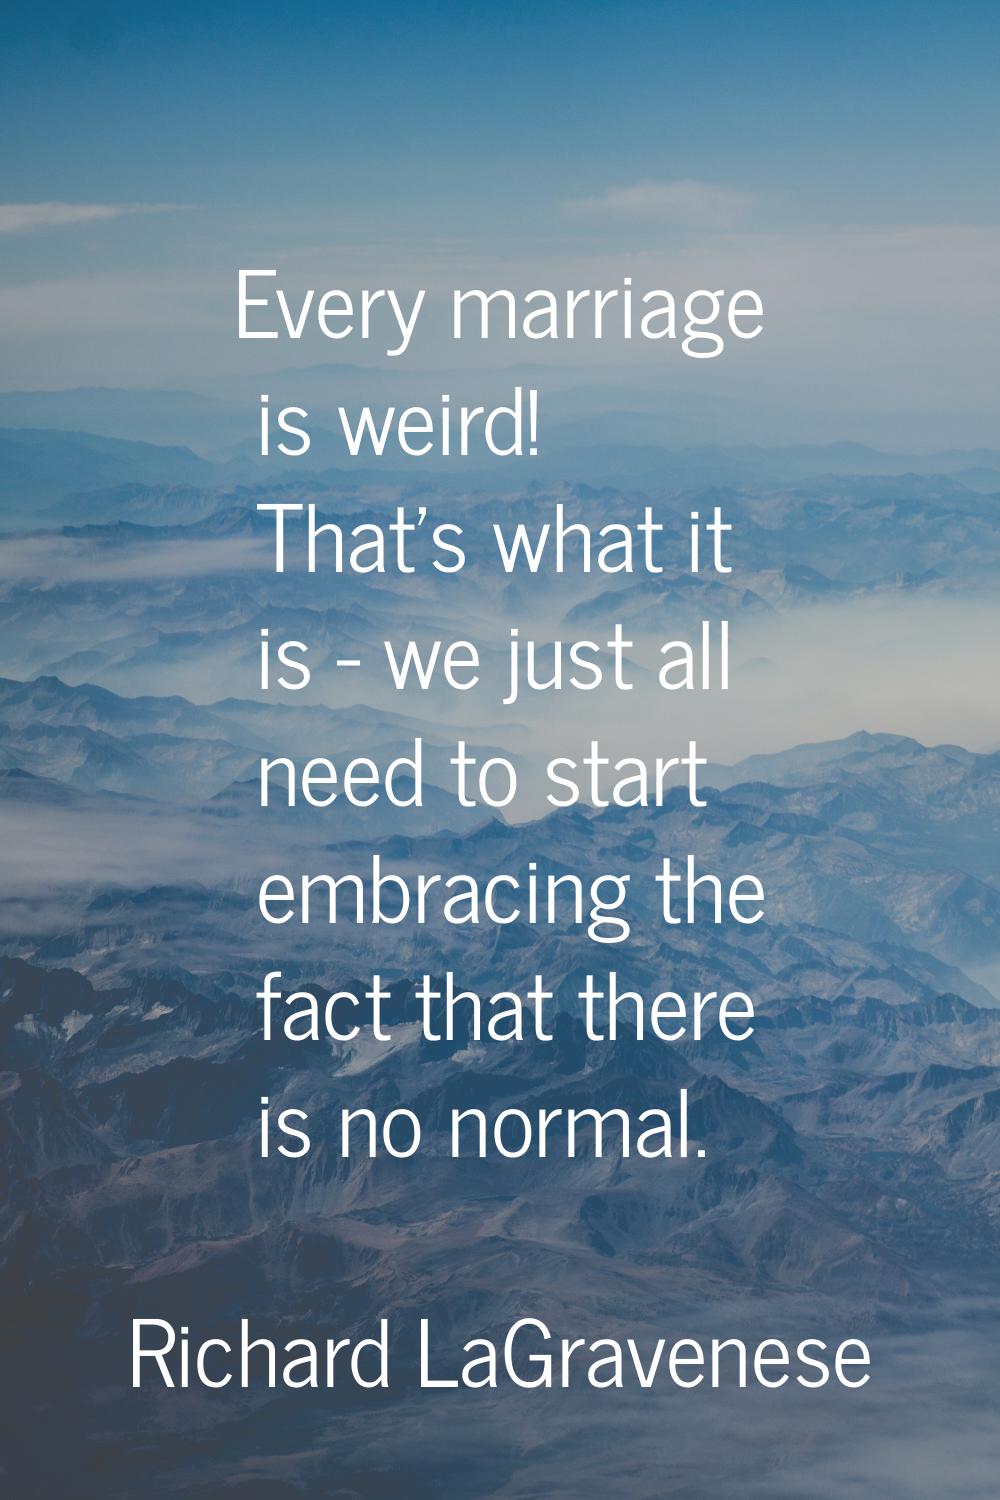 Every marriage is weird! That's what it is - we just all need to start embracing the fact that ther